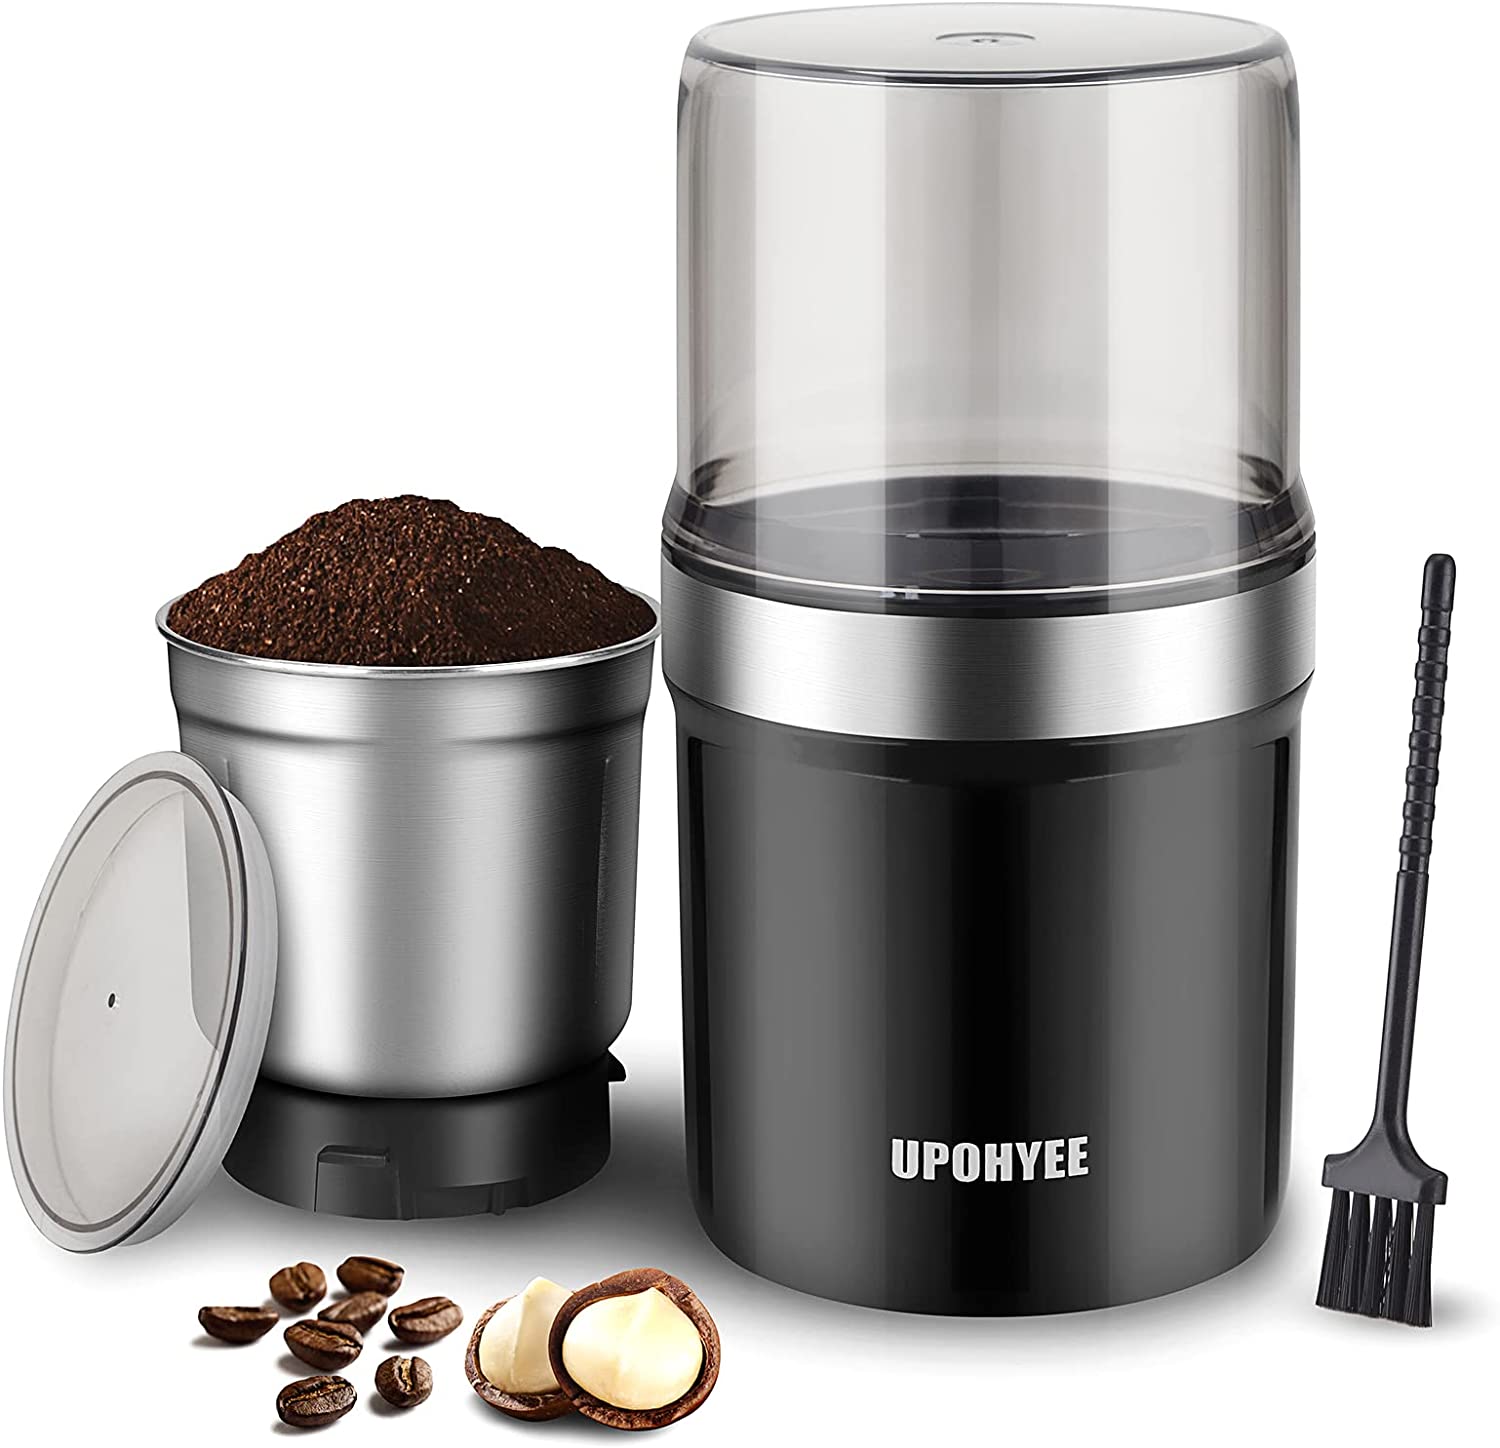 UPOHYEE Electric Coffee Grinder 350 W Coffee Grinder Capacity 120 g with Powerful Stainless Steel Blade Grain Mill with Safety Lock for Coffee Beans Pesto Spices Nuts Sugar Herbs Grain Black